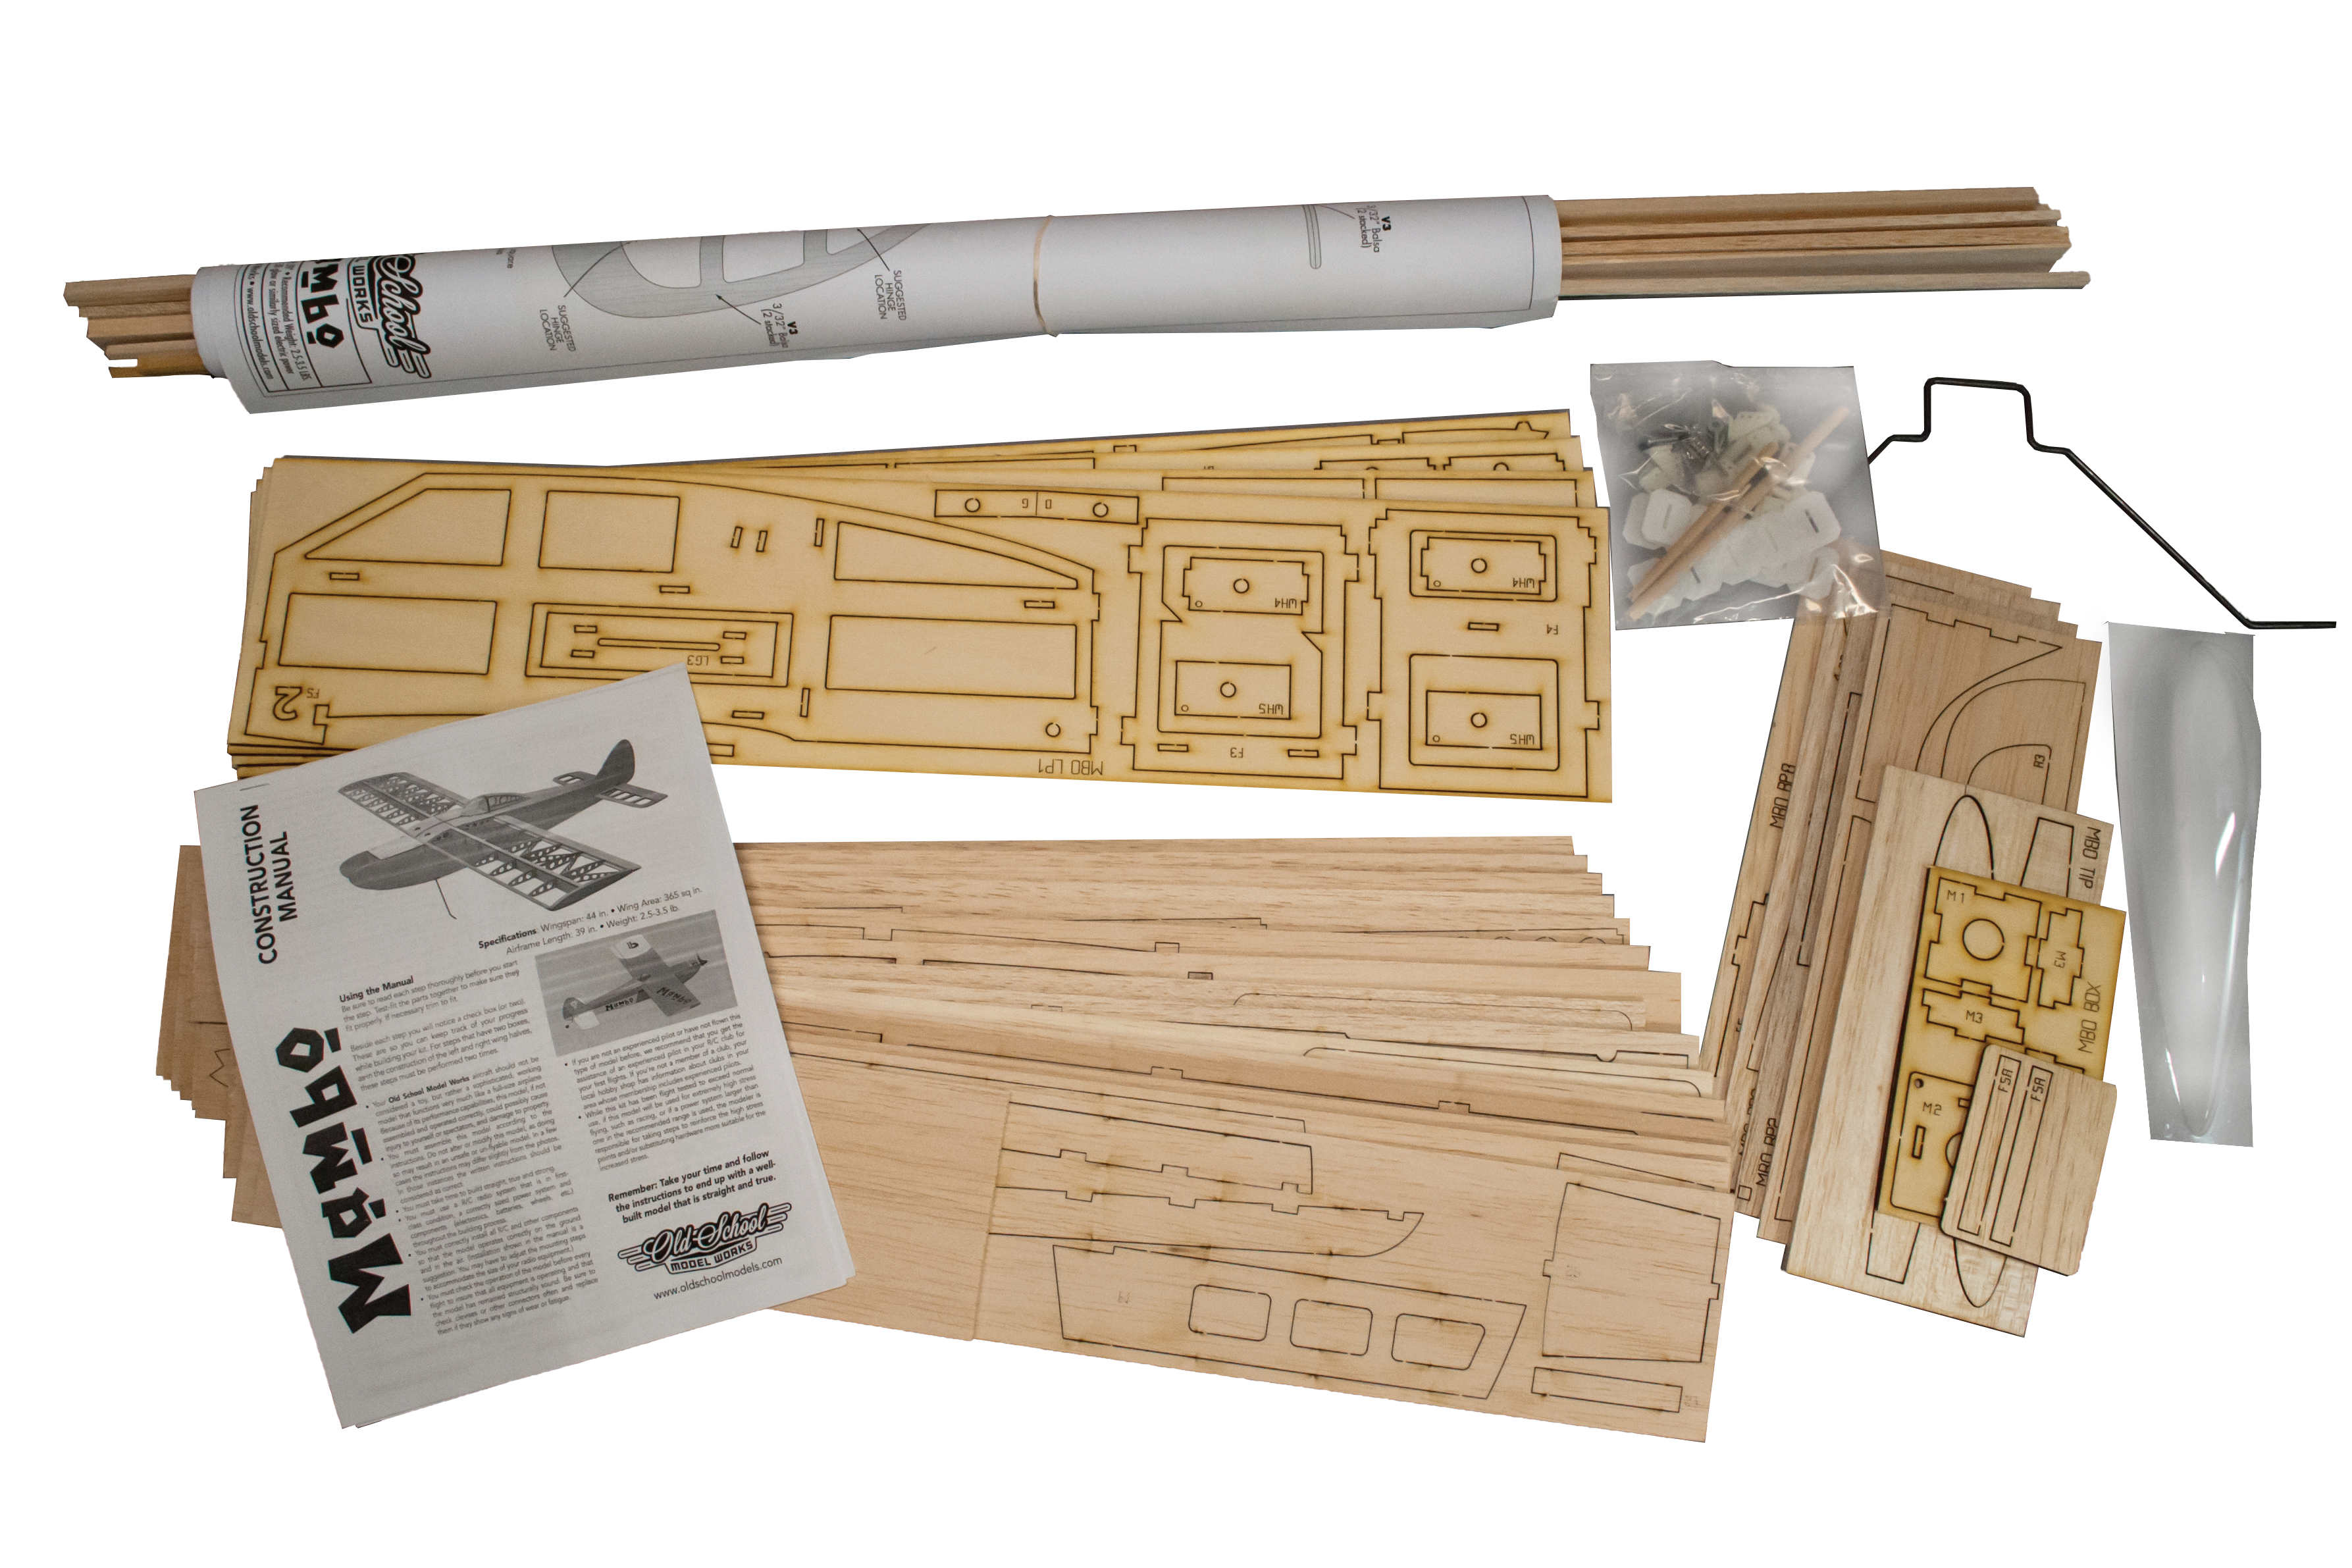 the mambo kit includes laser-cut components